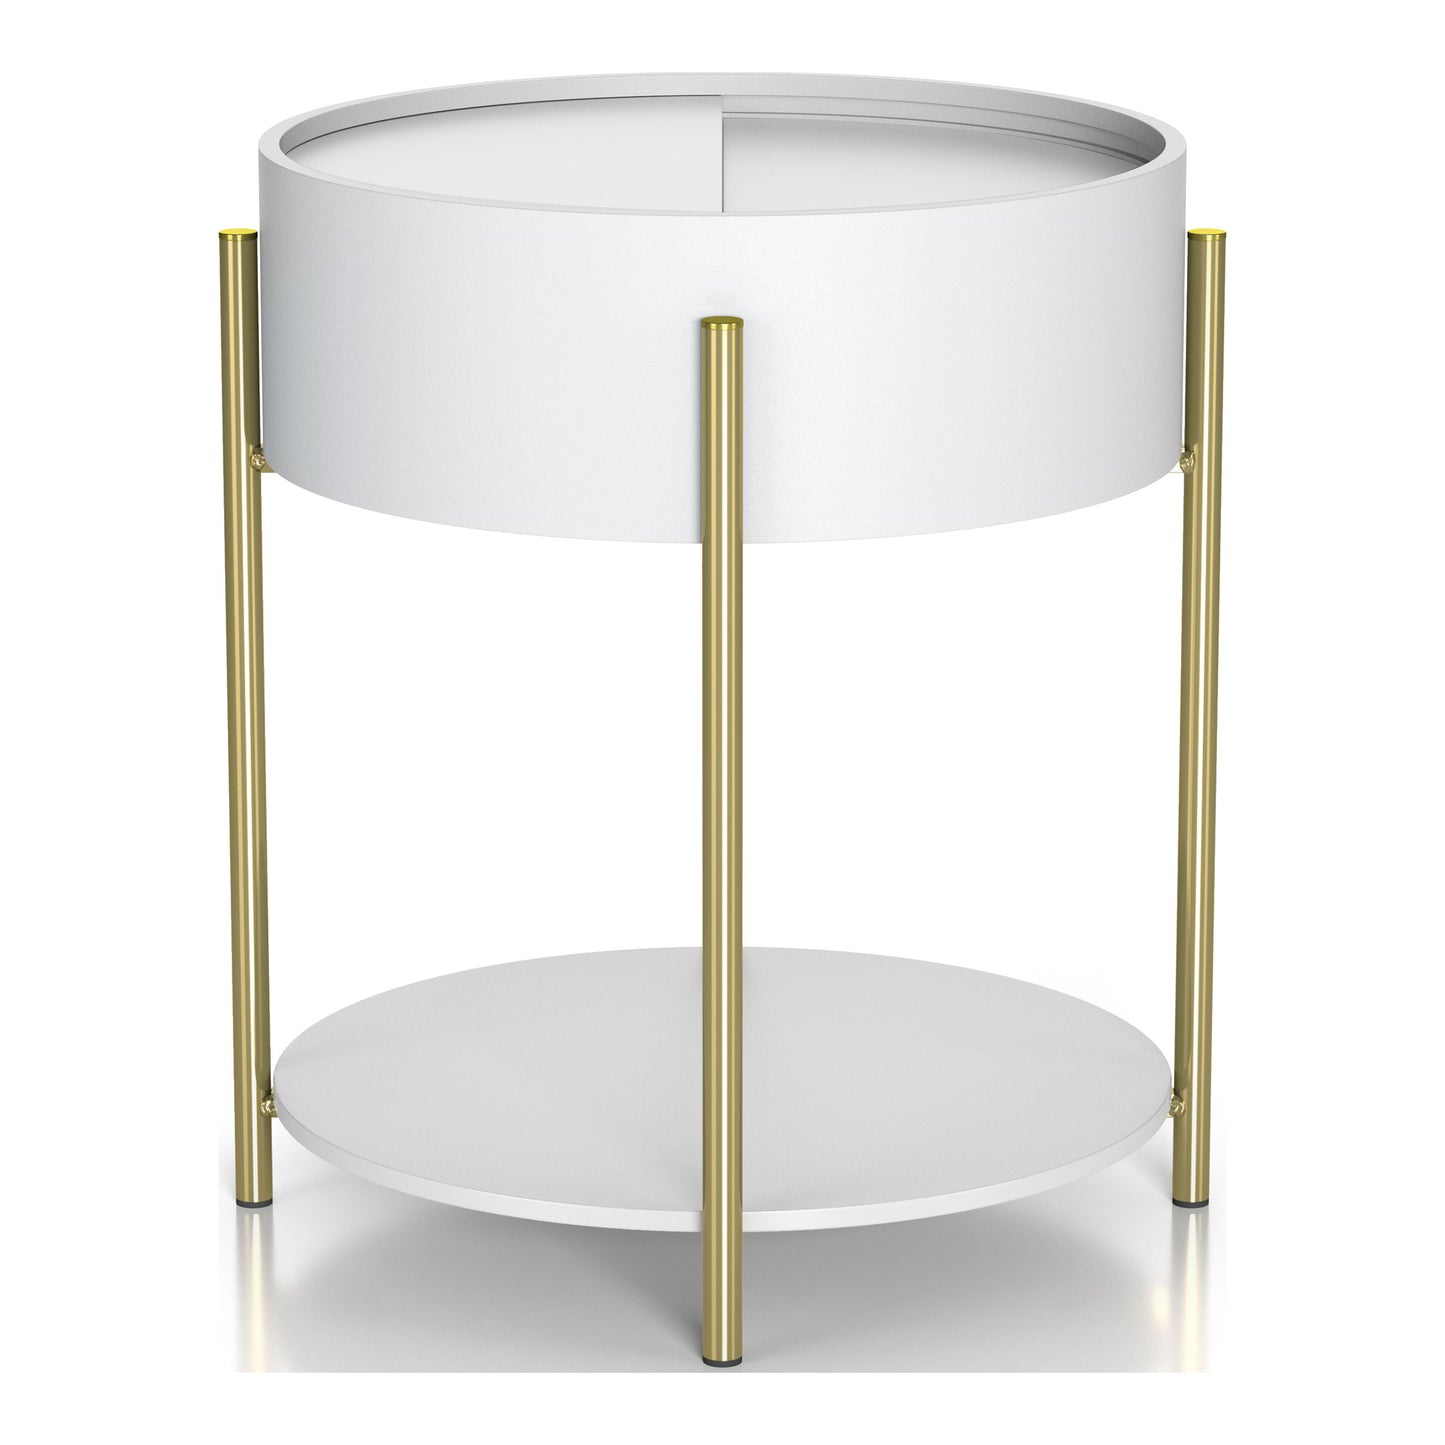 Front-facing modern white and gold round storage end table on a white background